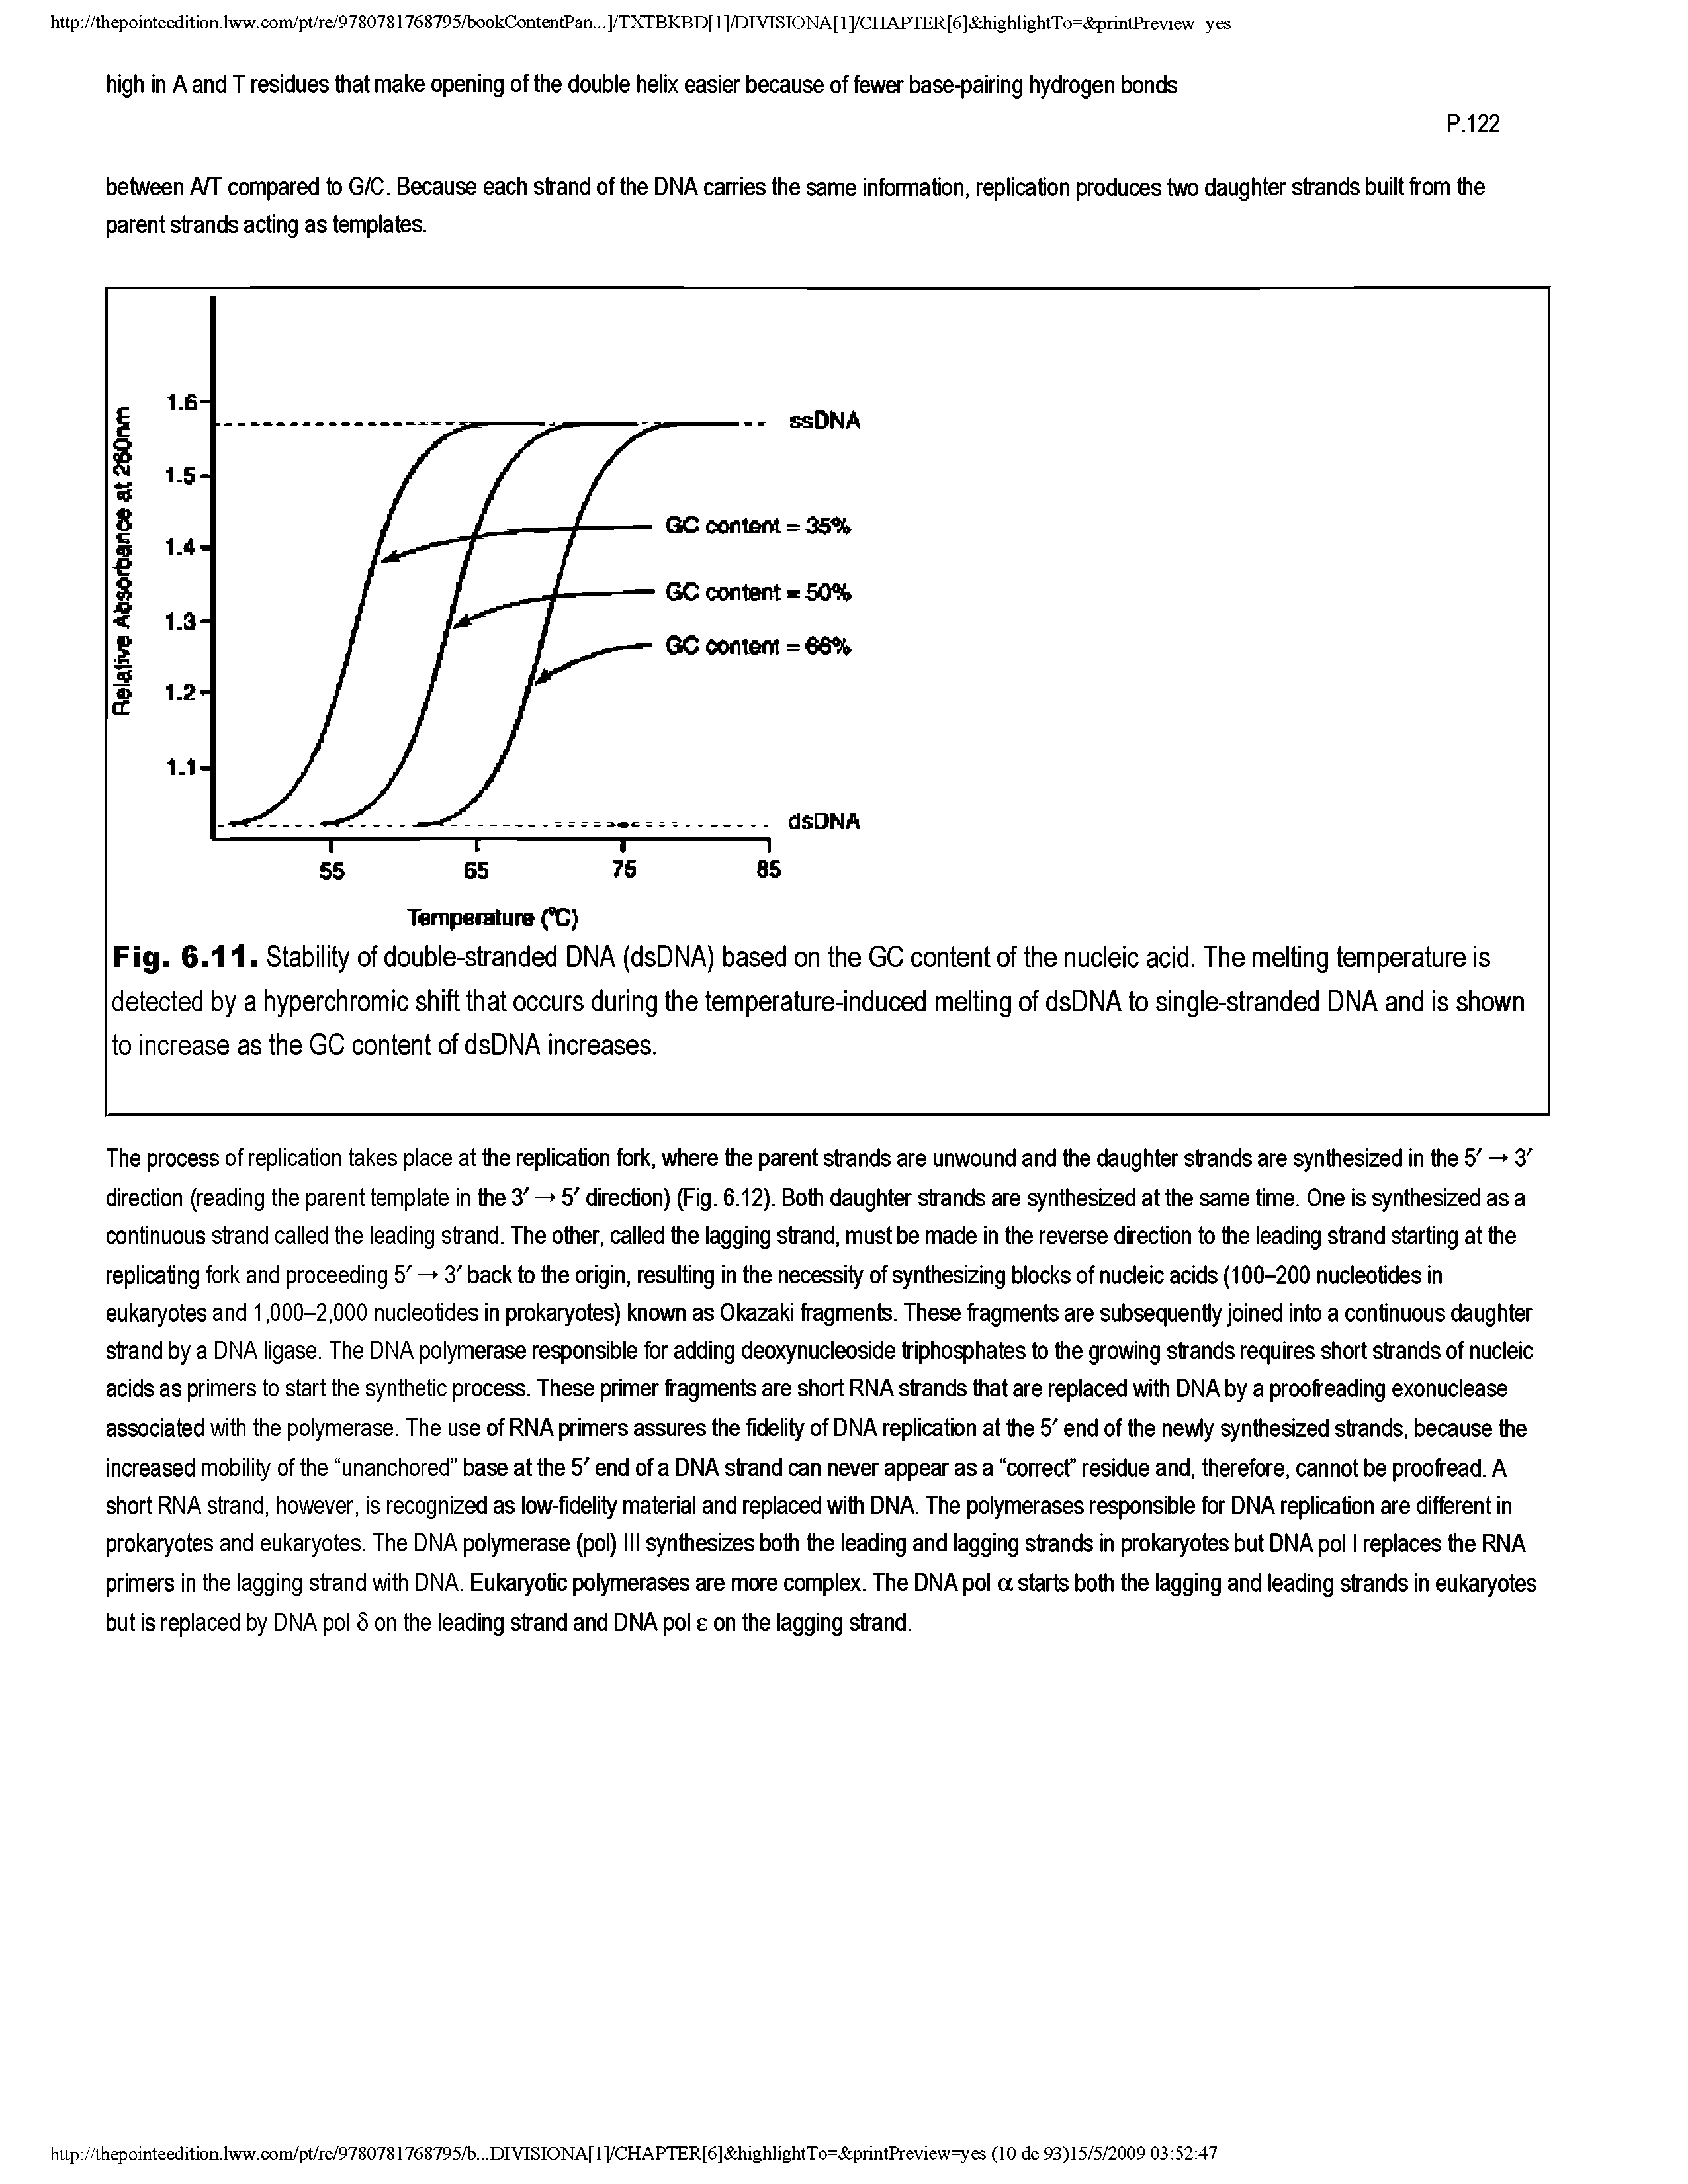 Fig. 6.11. Stability of double-stranded DNA (dsDNA) based on the GC content of the nucleic acid. The melting temperature is detected by a hyperchromic shift that occurs during the temperature-induced melting of dsDNA to single-stranded DNA and is shown to increase as the GC content of dsDNA increases.